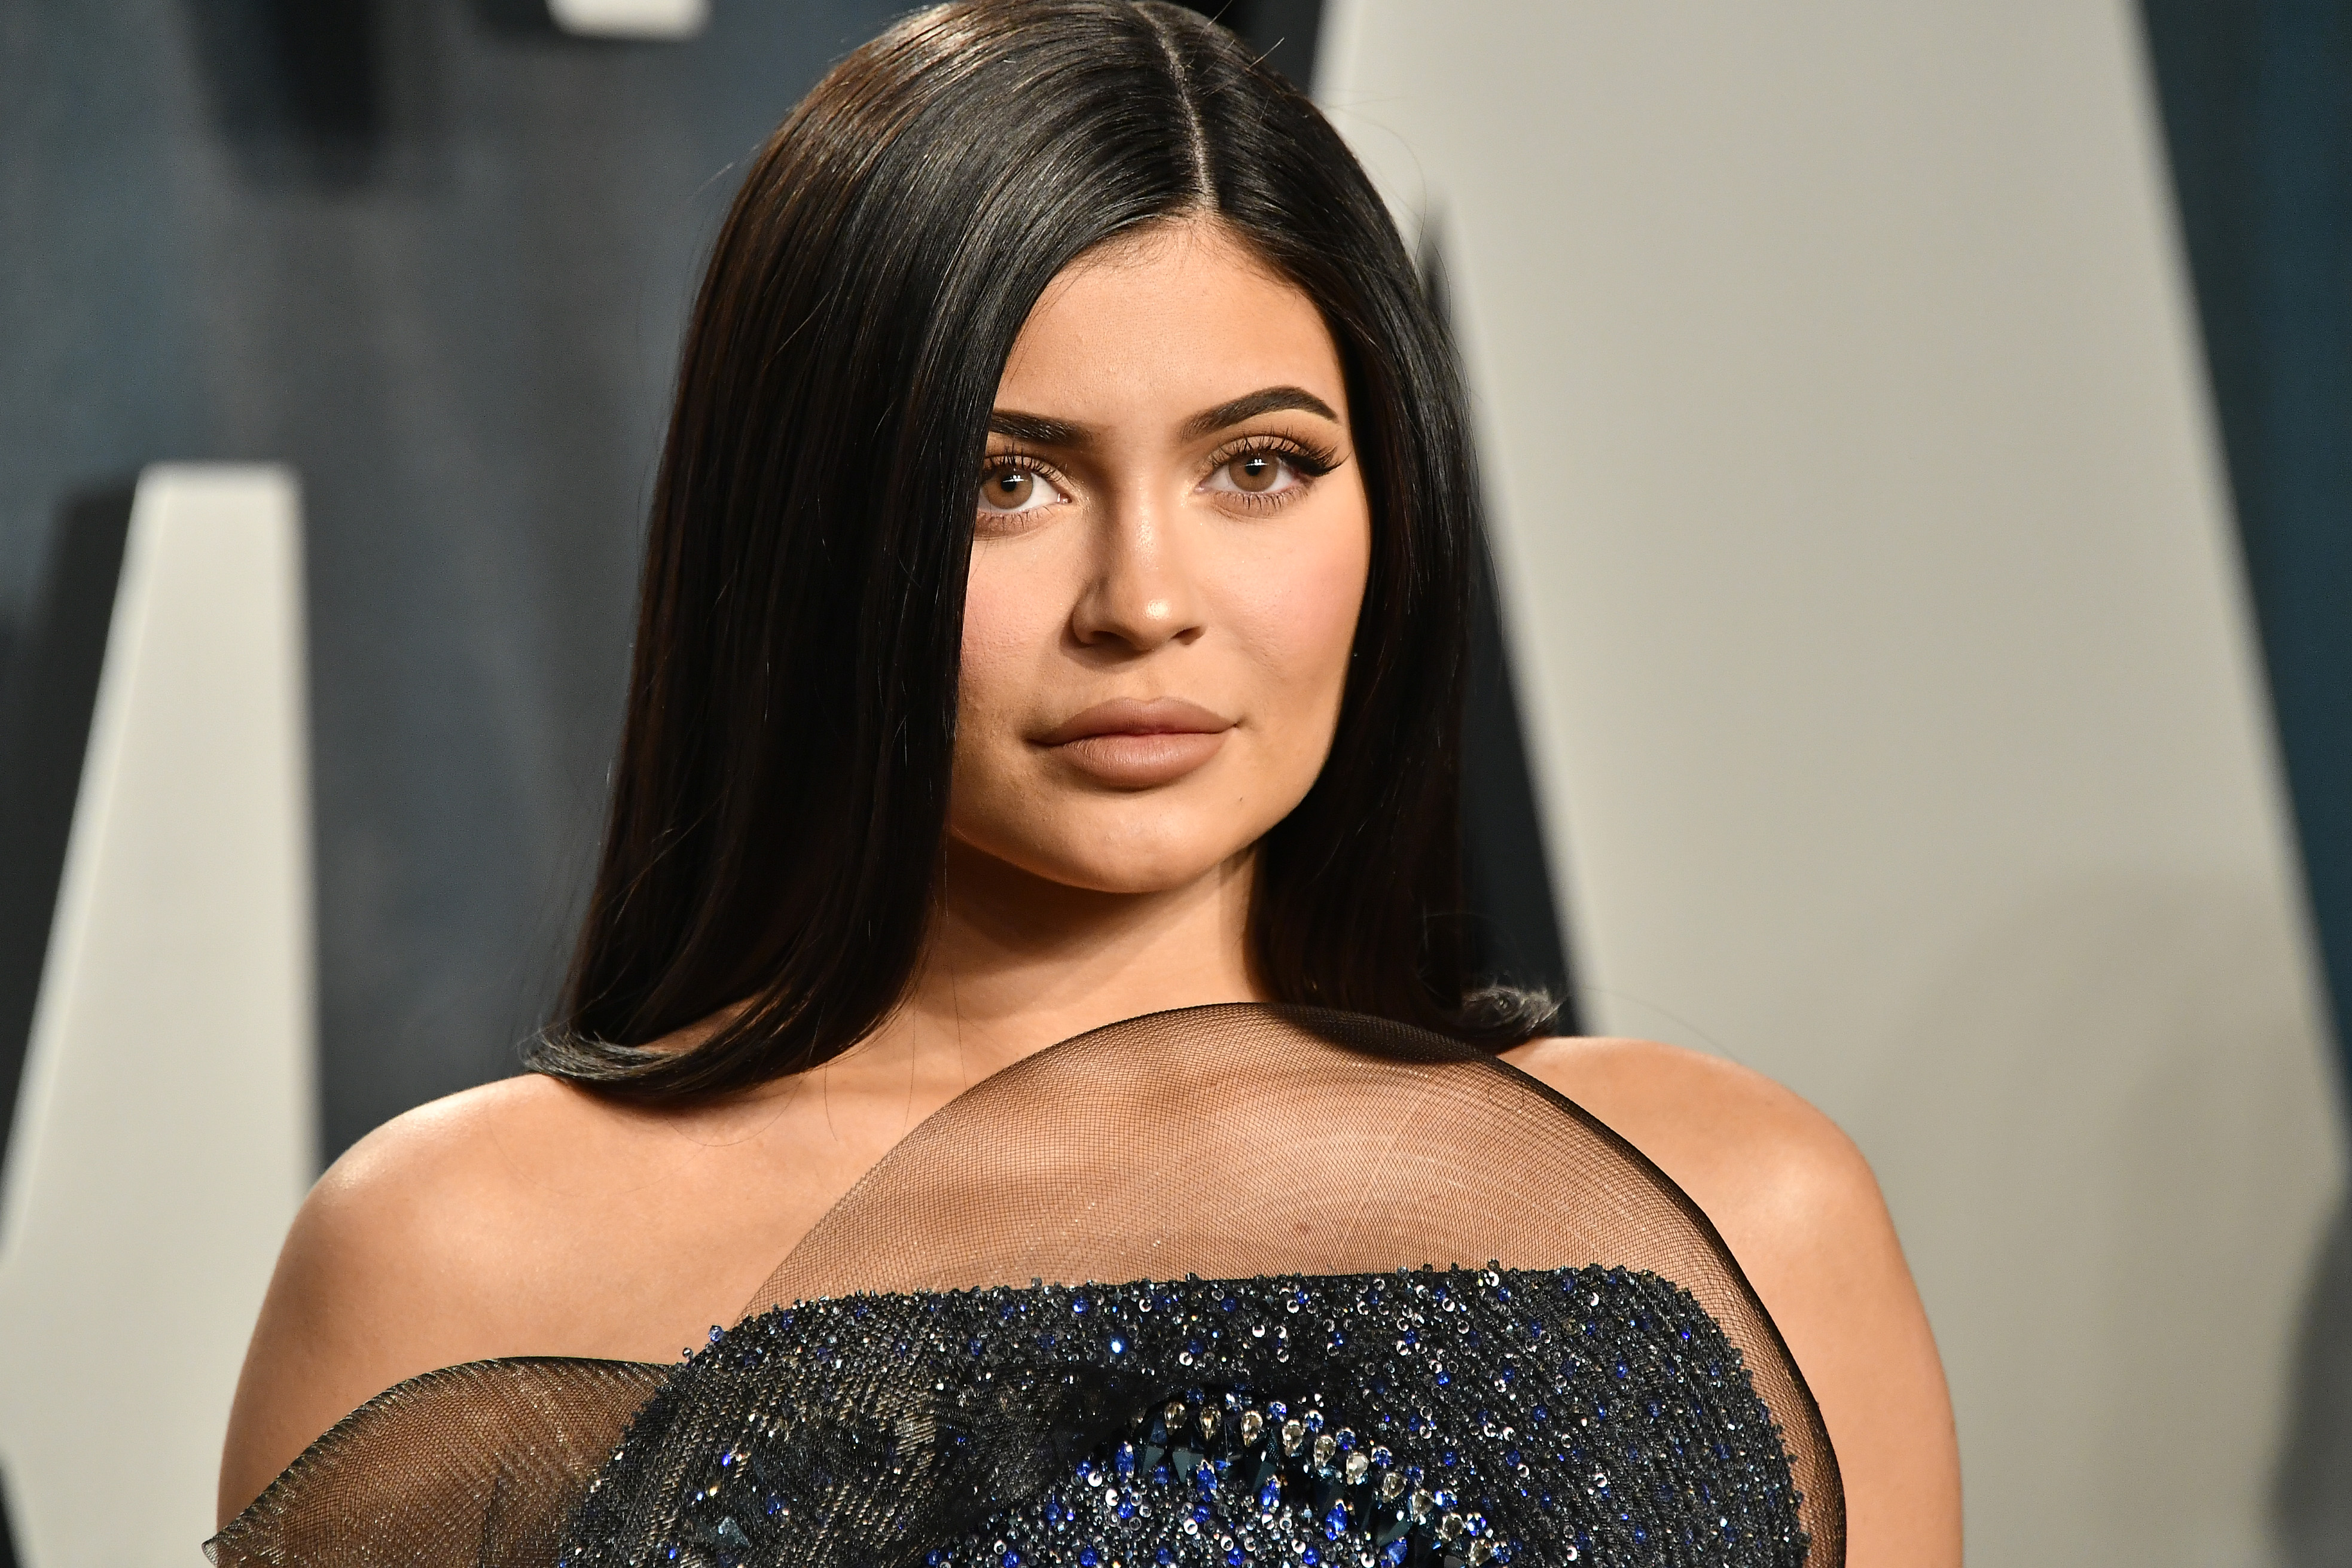 Kylie Jenner Says Tyga Told Her Blac Chyna Attacked Him With Knife During Testimony